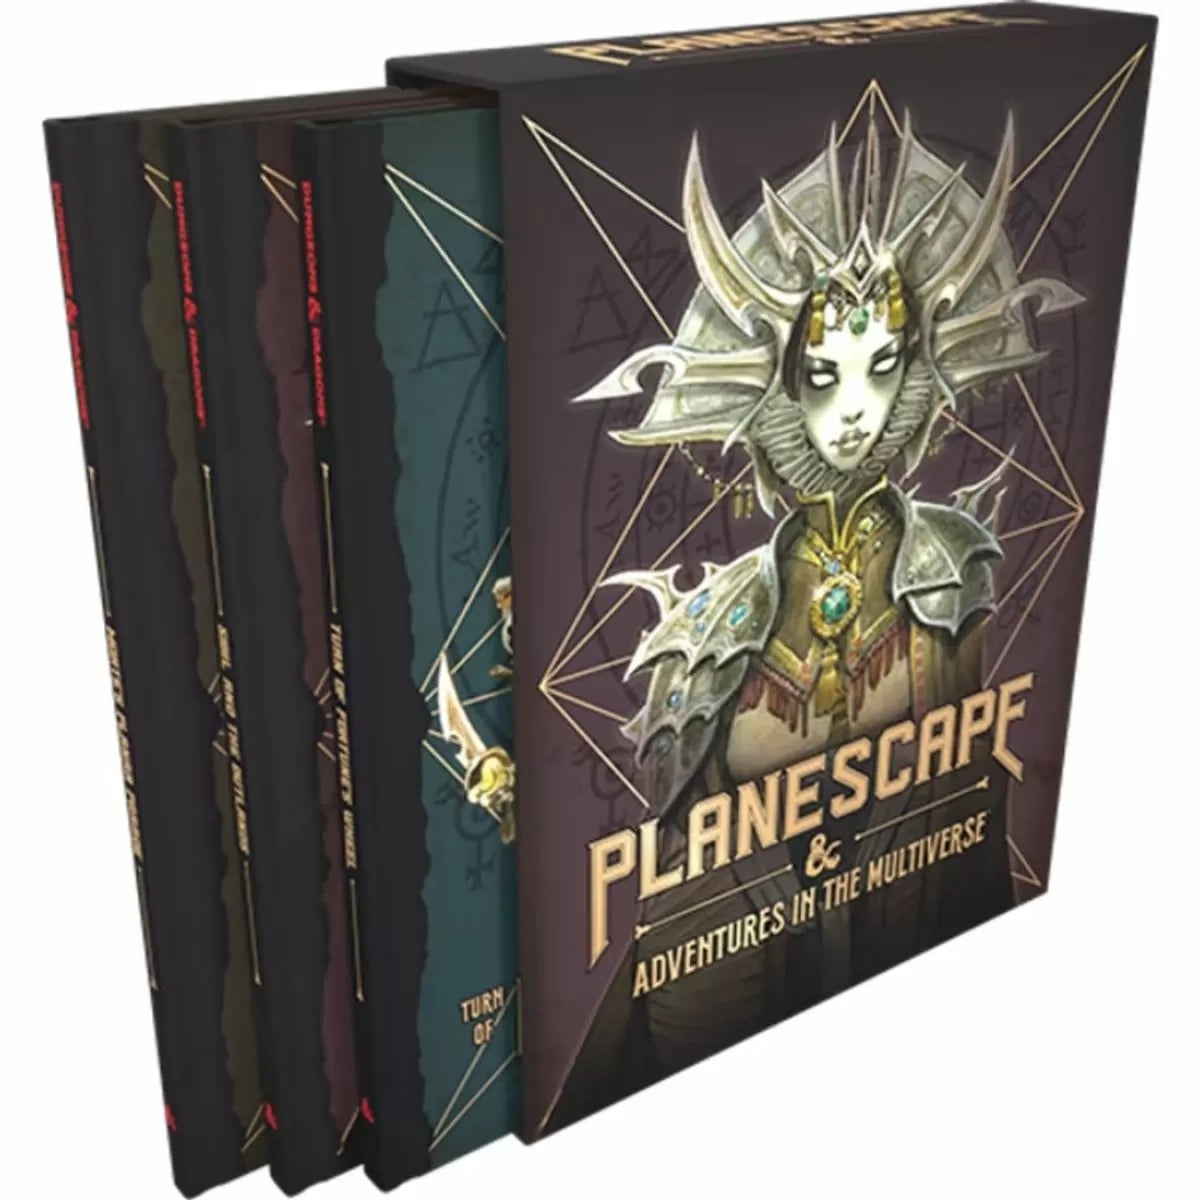 D&amp;D Planescape - Adventures in the Multiverse Hobby Store Exclusive